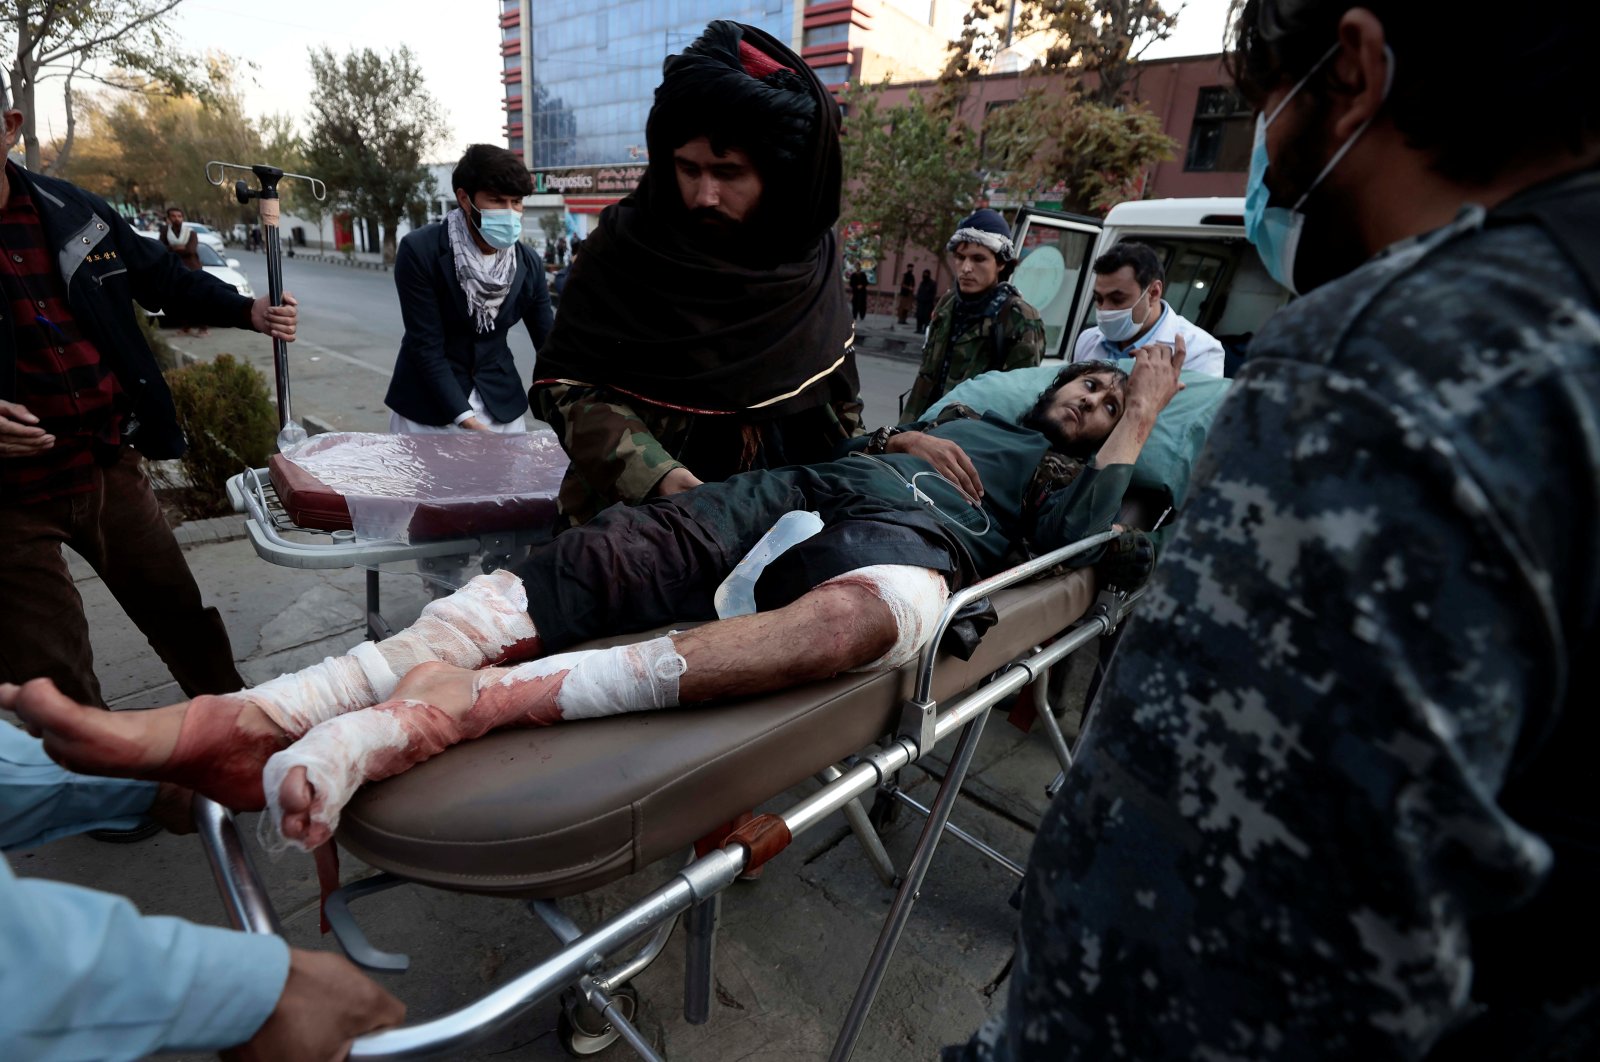 A Taliban fighter, who was injured during a blast, is pictured at the entrance of the hospital in Kabul, Afghanistan, Nov. 2, 2021. (Reuters Photo)